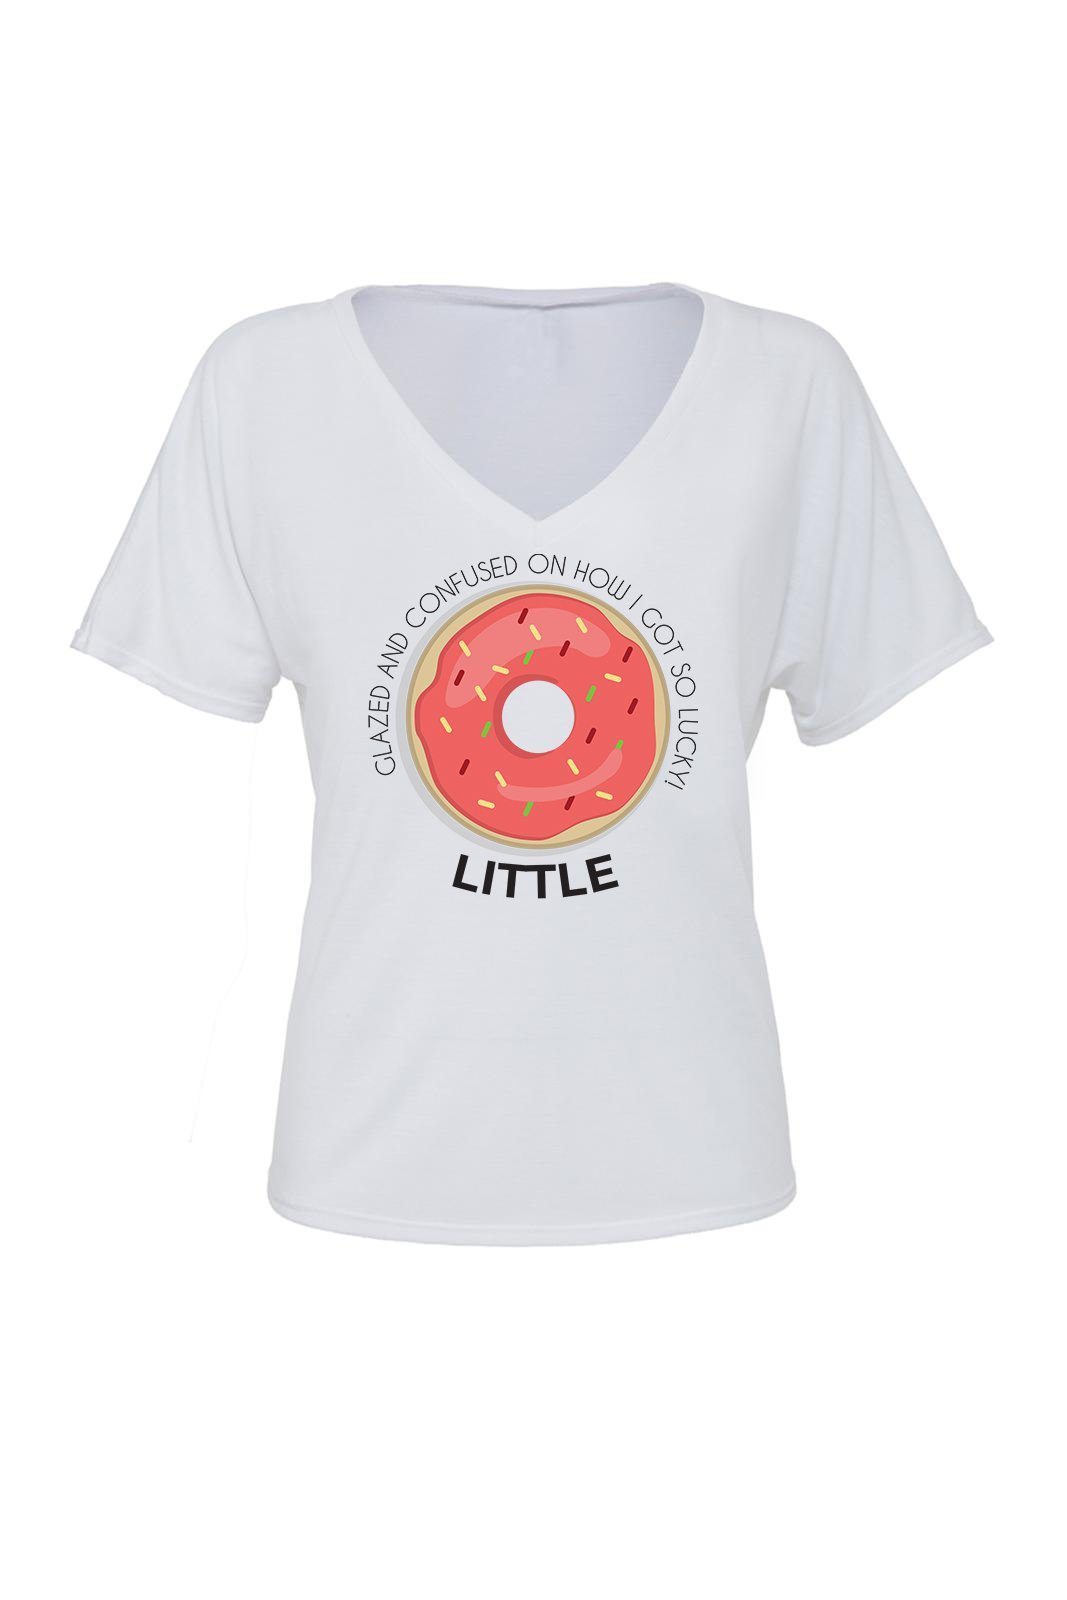 Big Little Donut Shirt - Bella Slouchy V-Neck Short Sleeve, Ladies, Sunny and Southern, - Sunny and Southern,